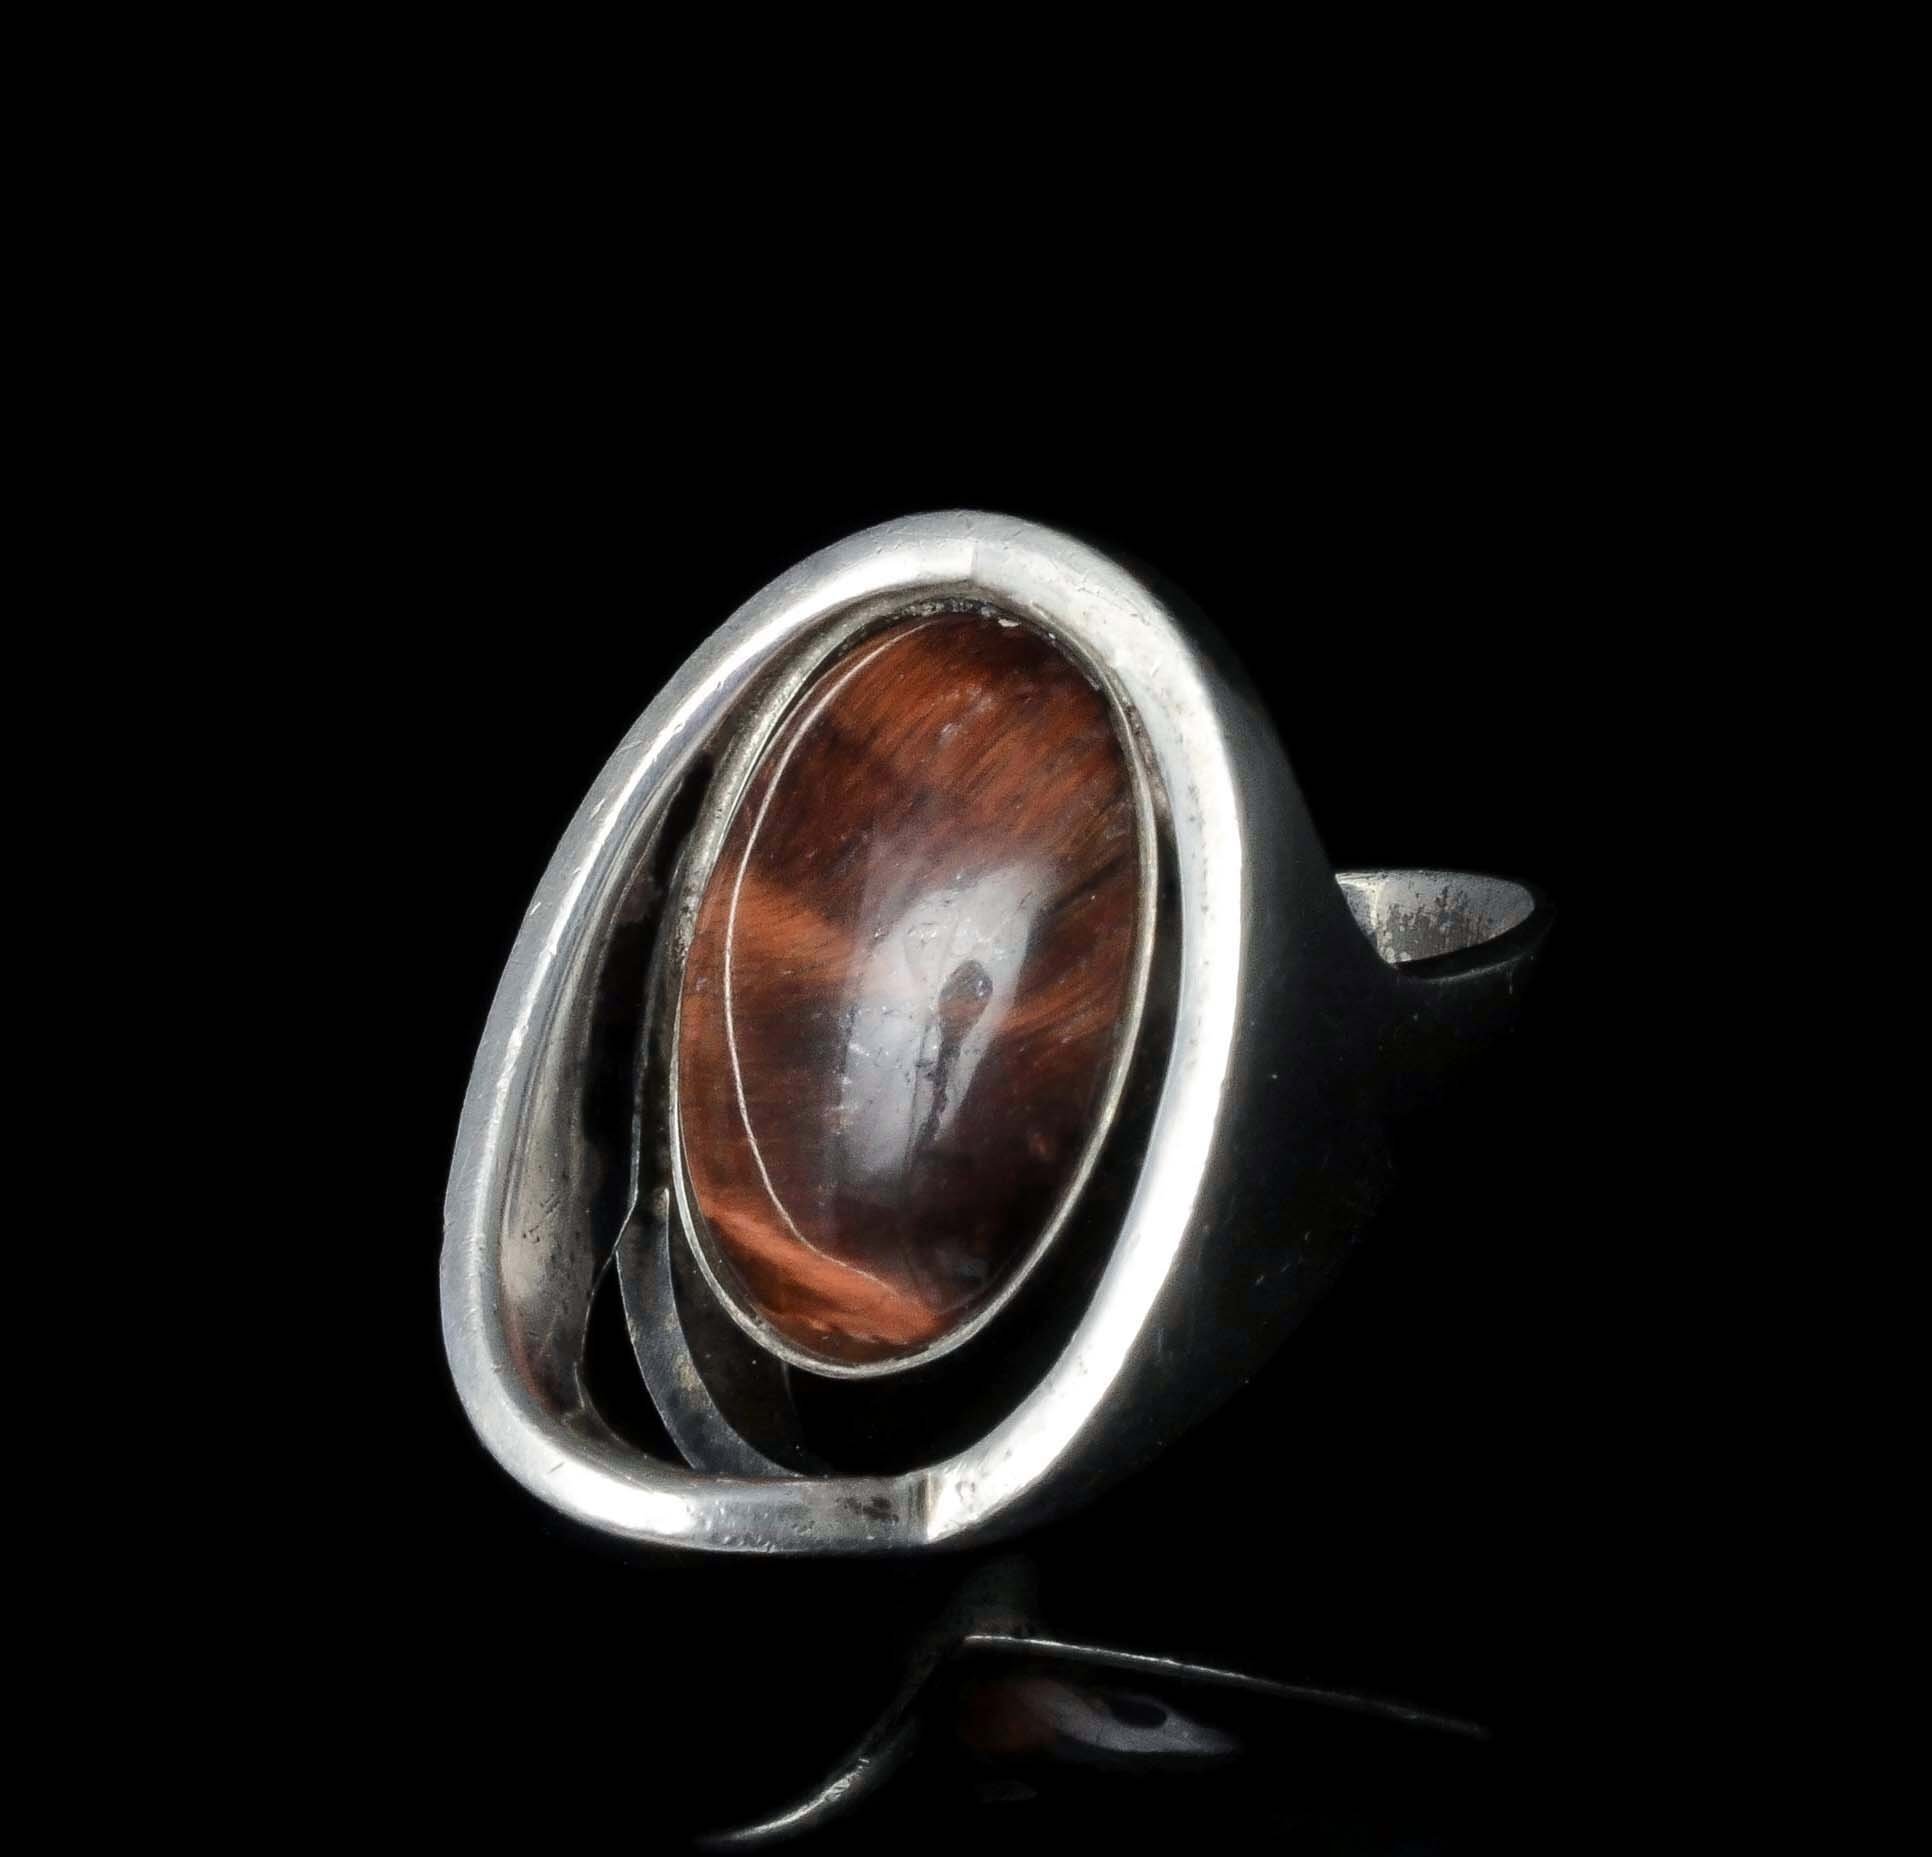 Erika Hult de Corral Ric Mexican silver modernist ring